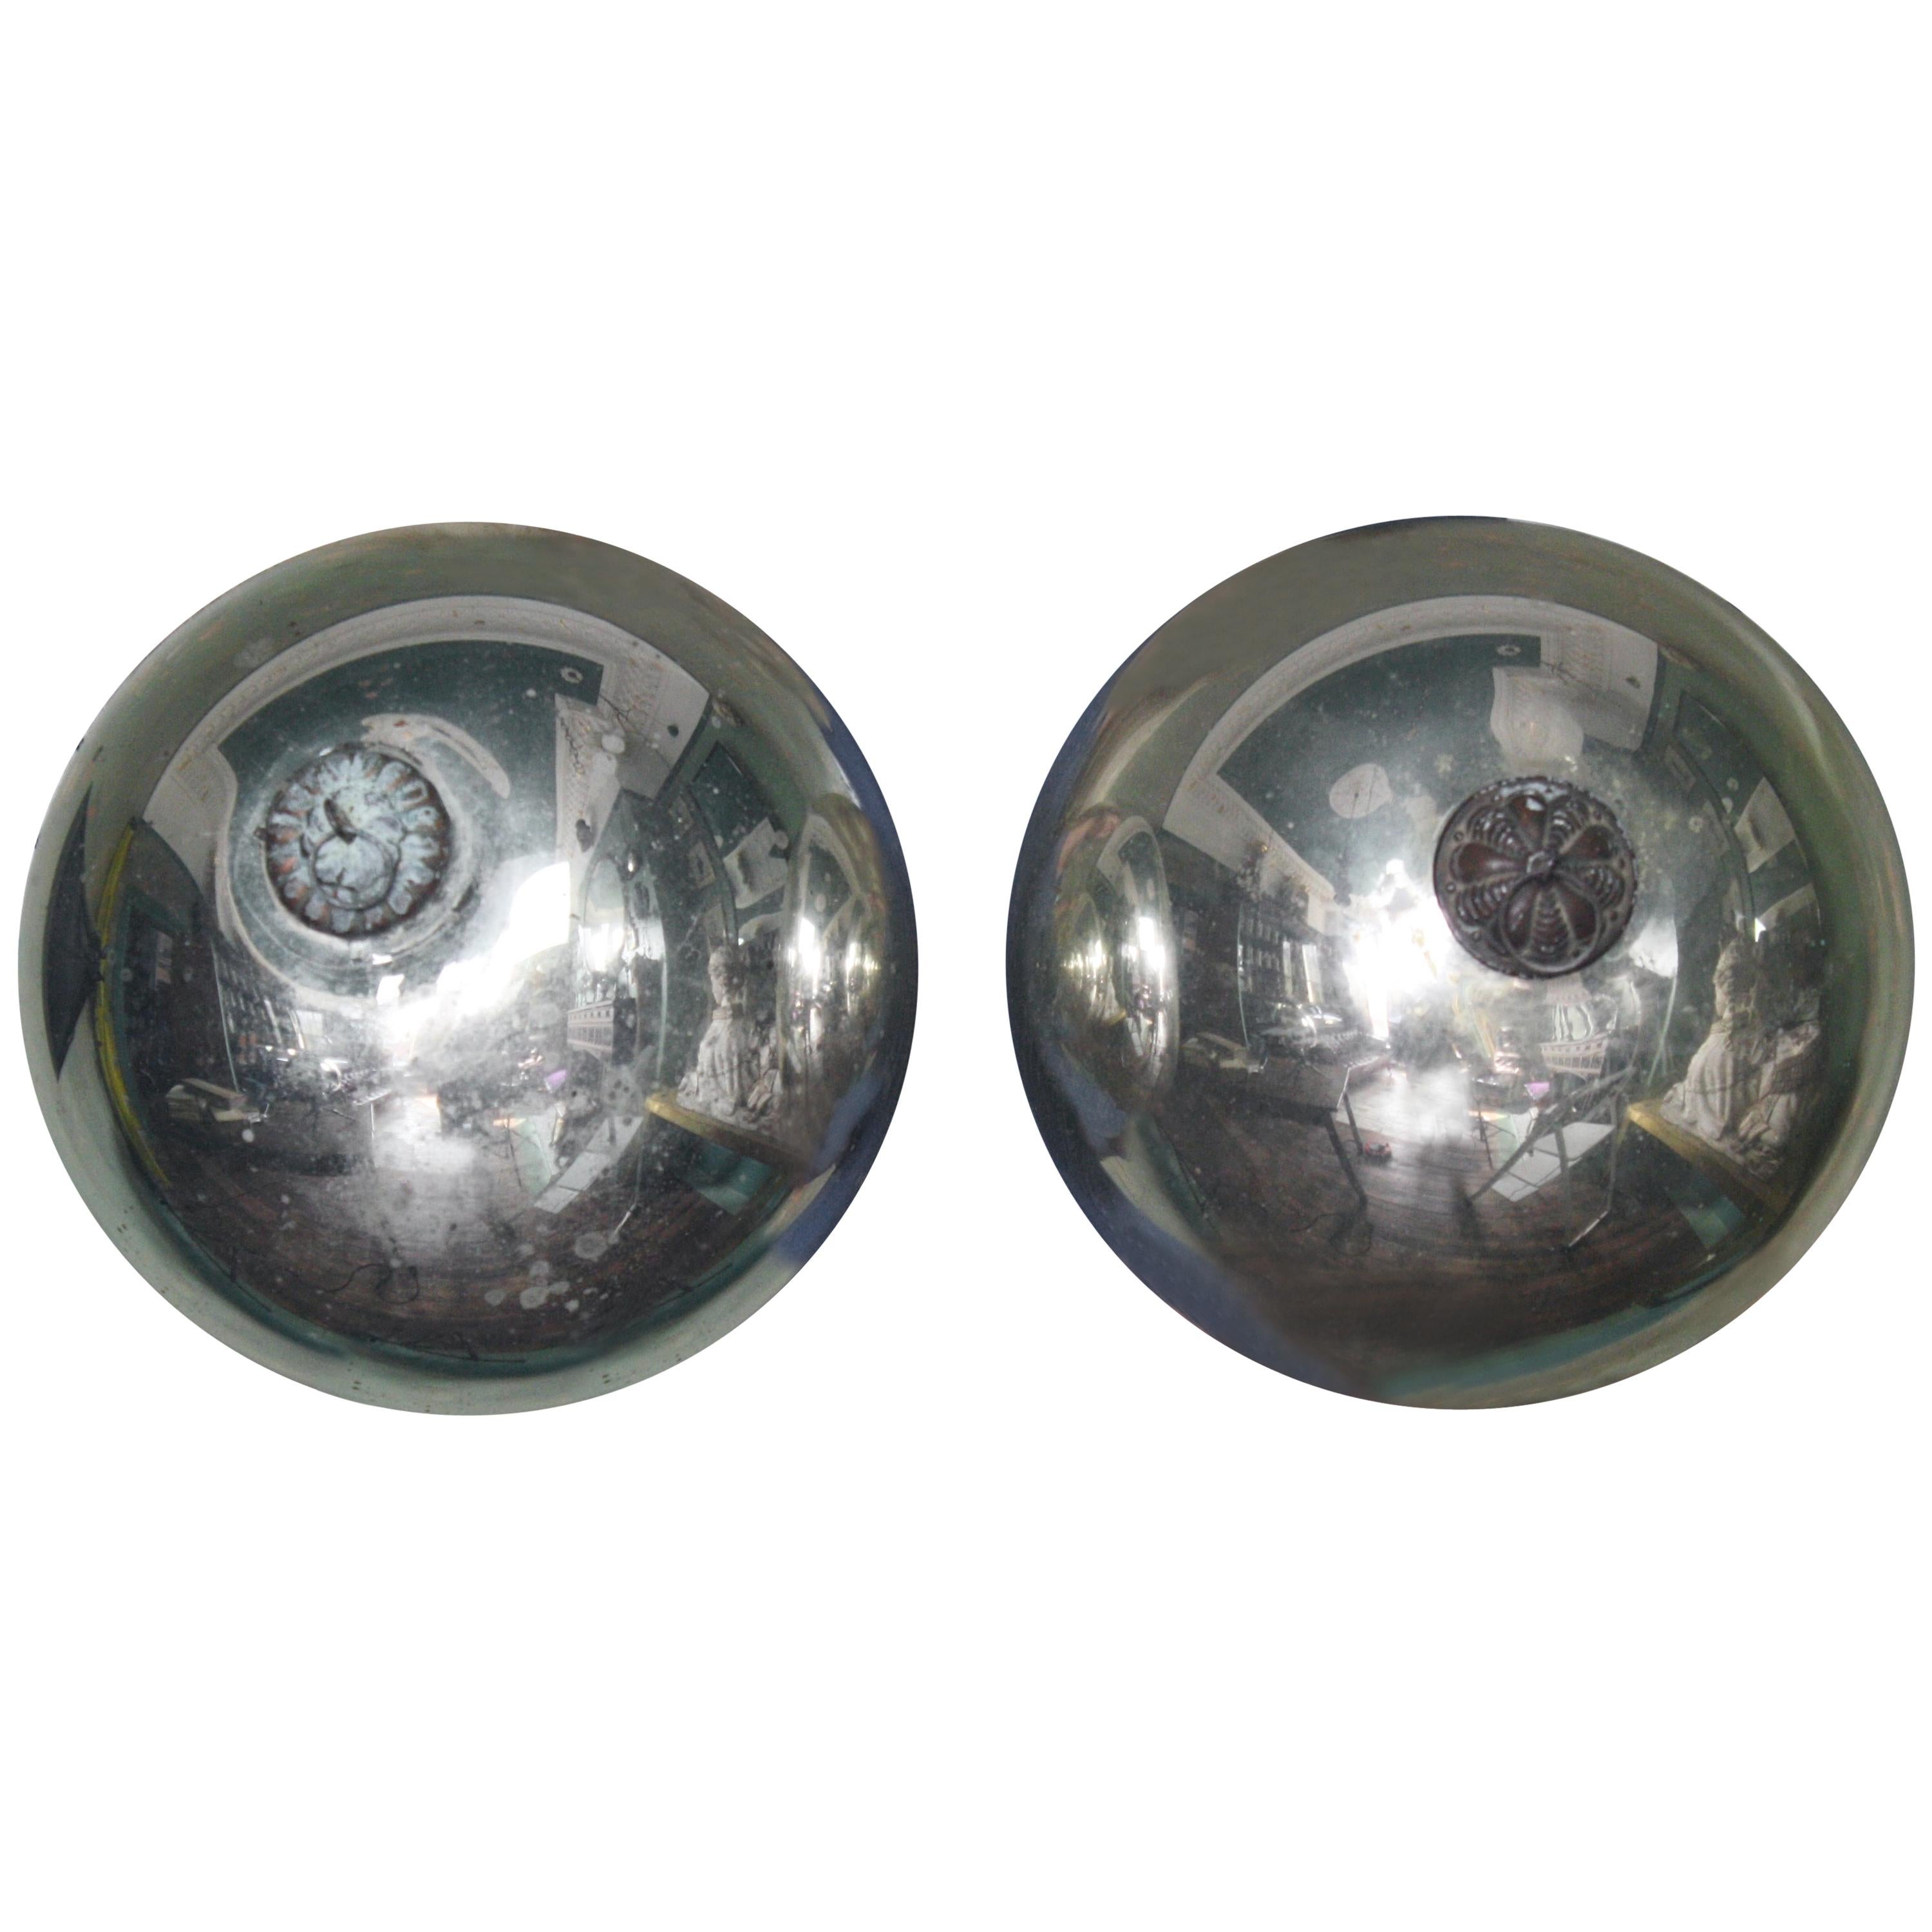 Pair of 19th Century Witches Balls